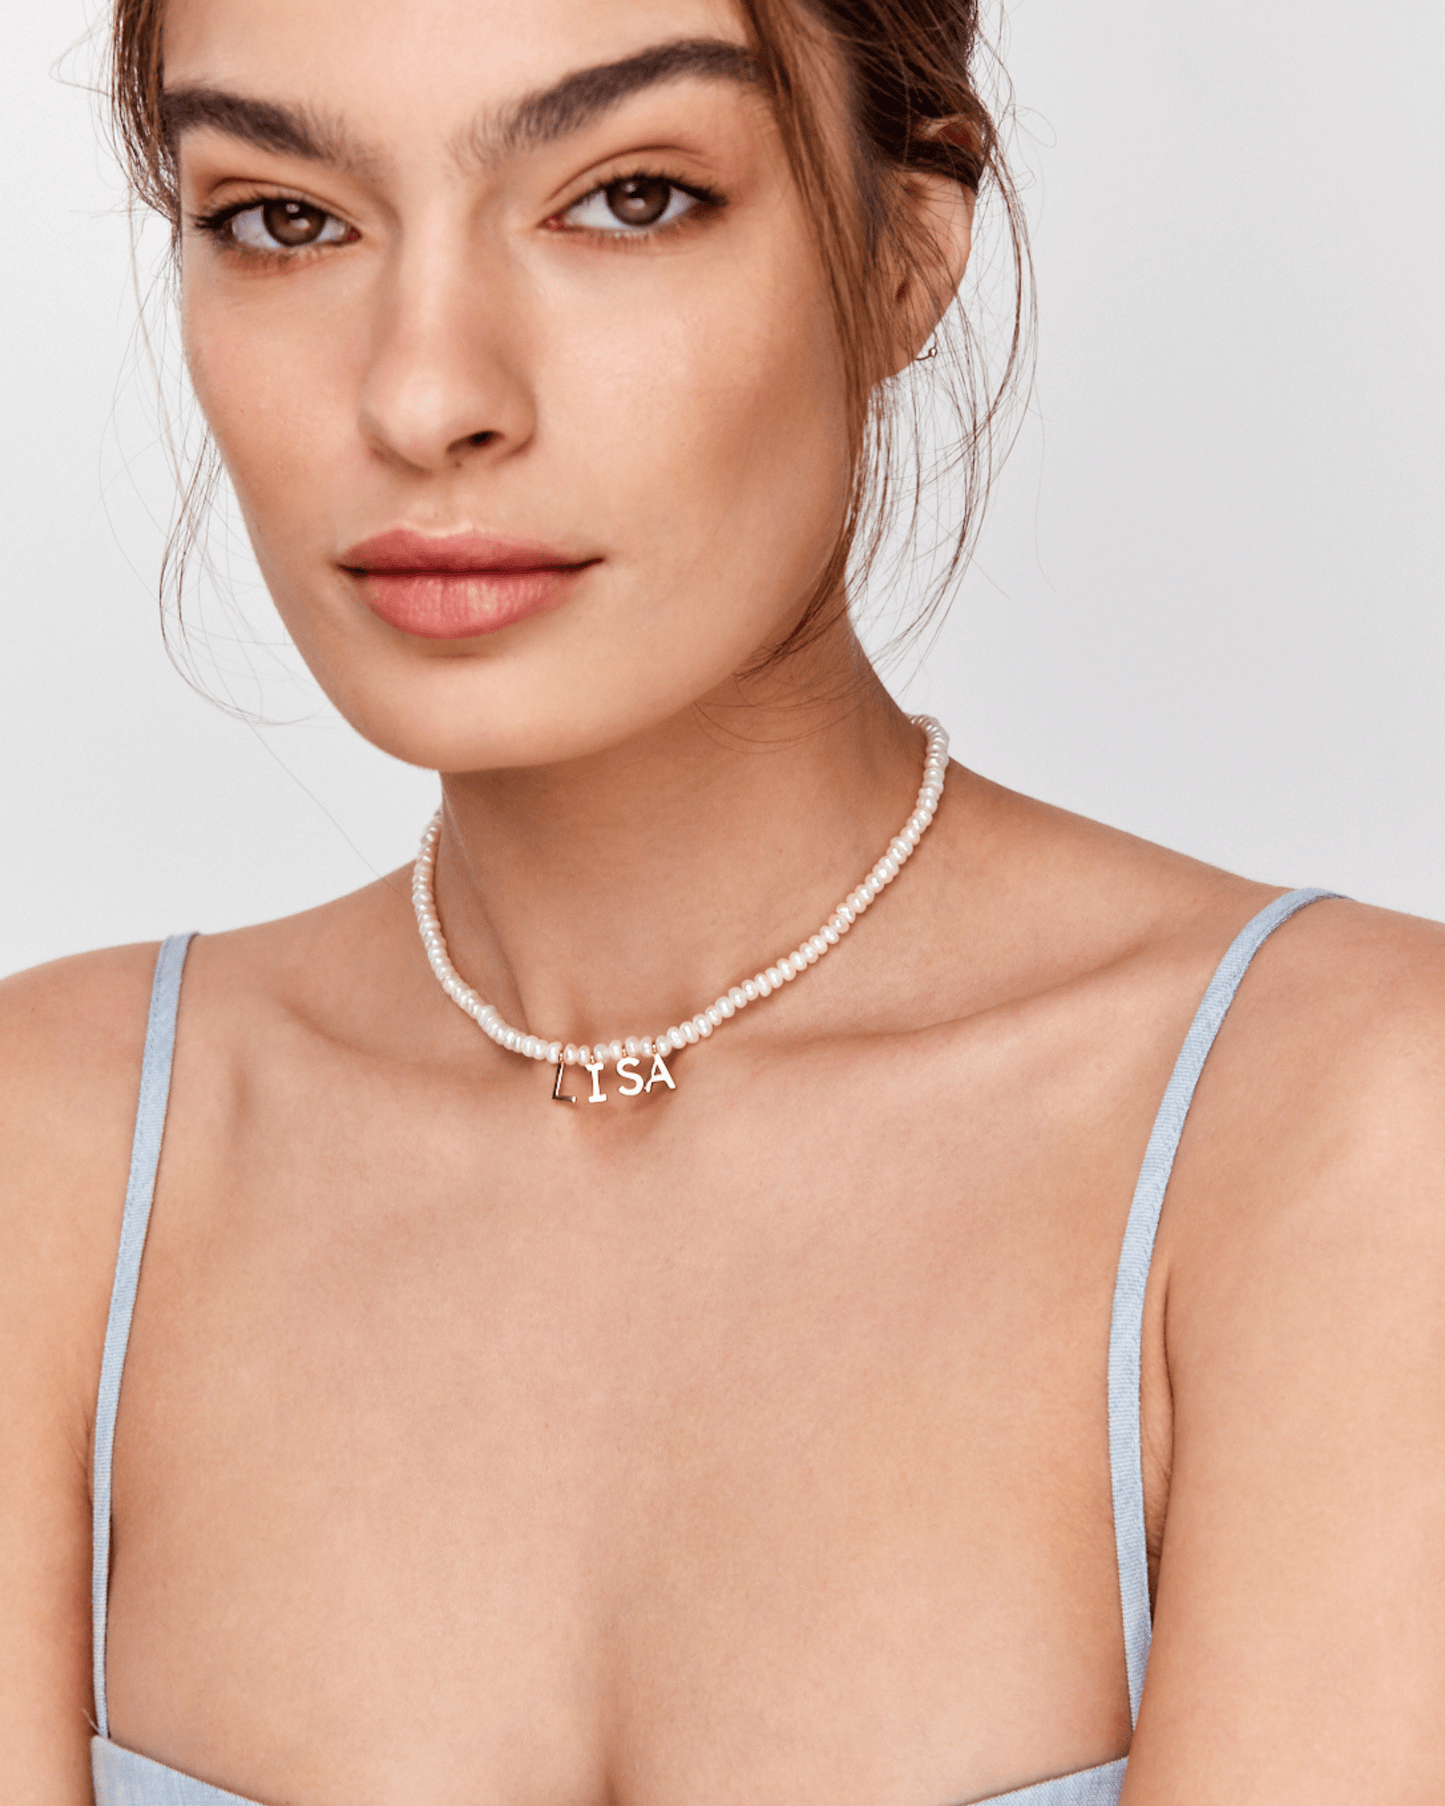 The Pearl Initial Necklace - 18K Rose Vermeil Necklaces magal-dev 